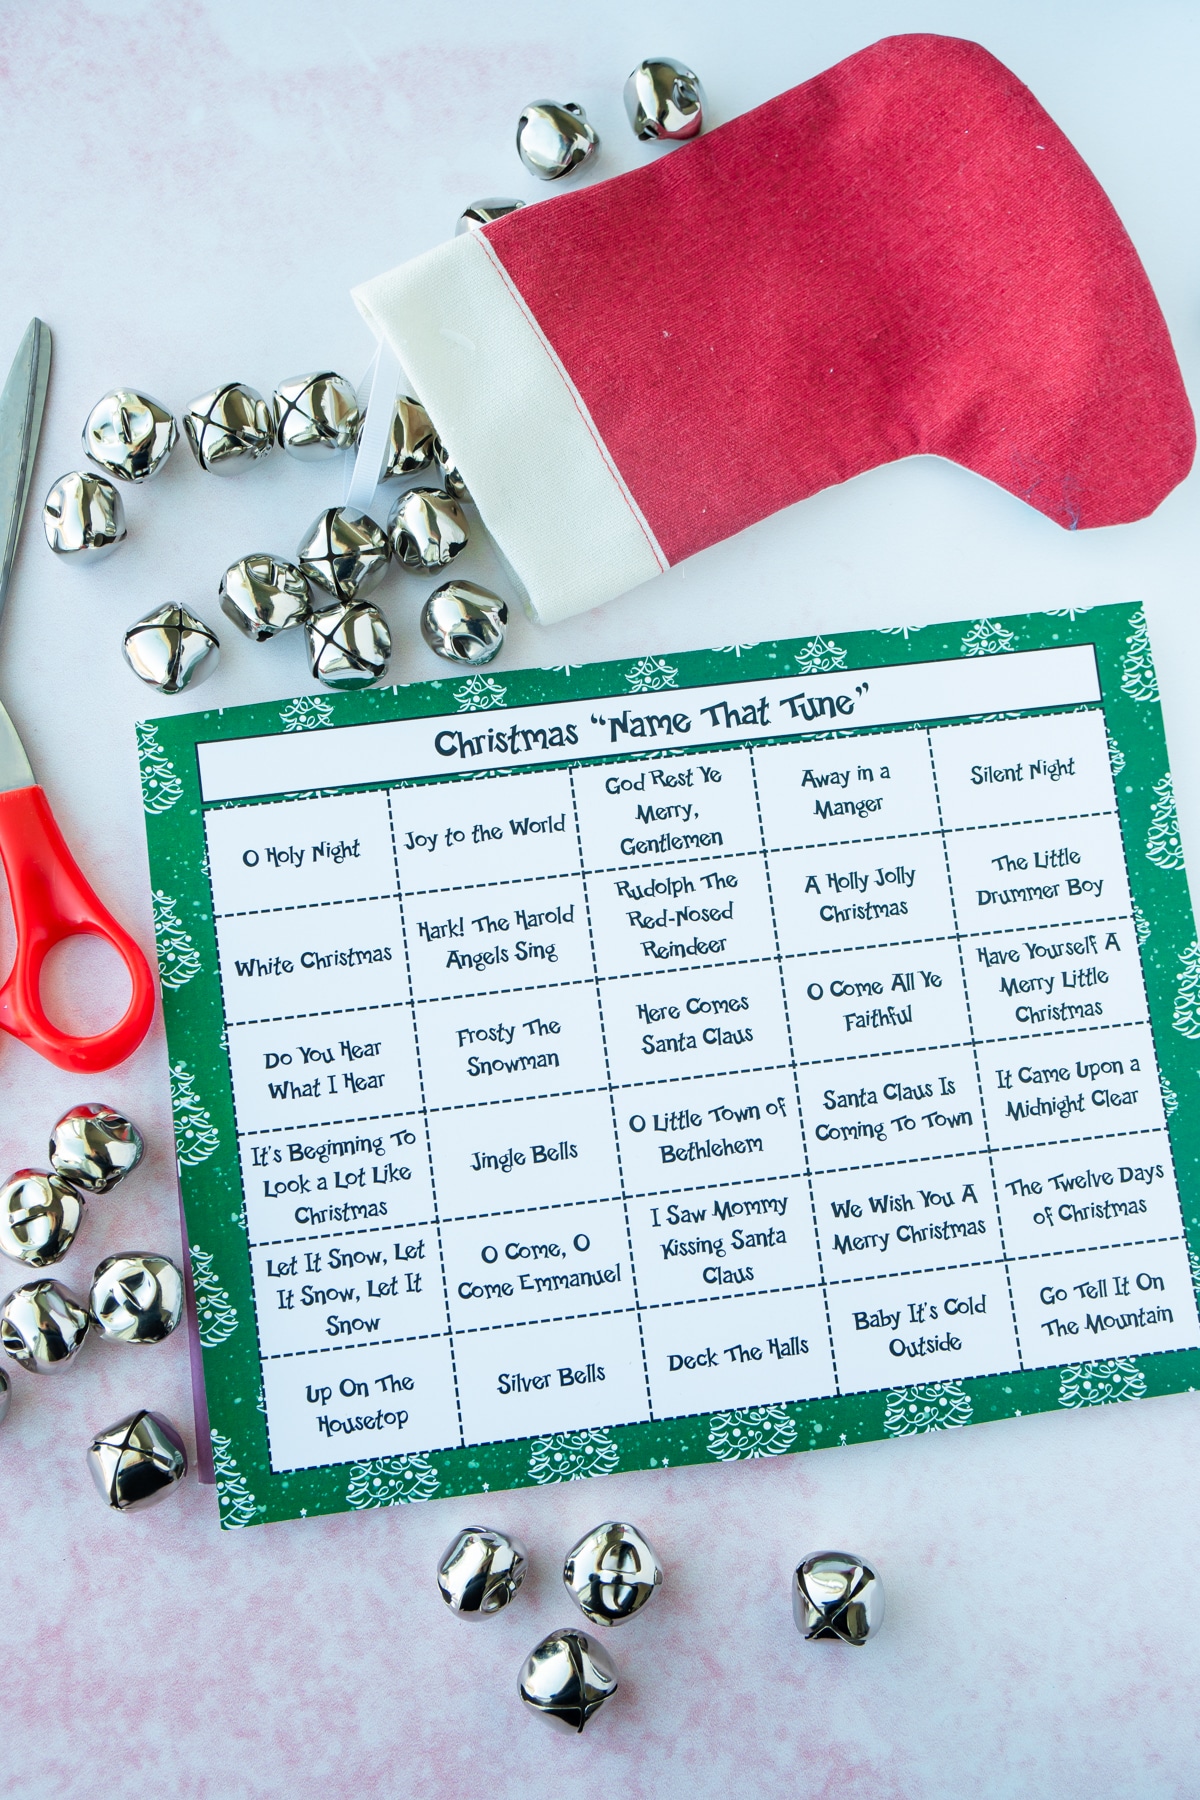 Christmas name that tune cards with scissors and bells